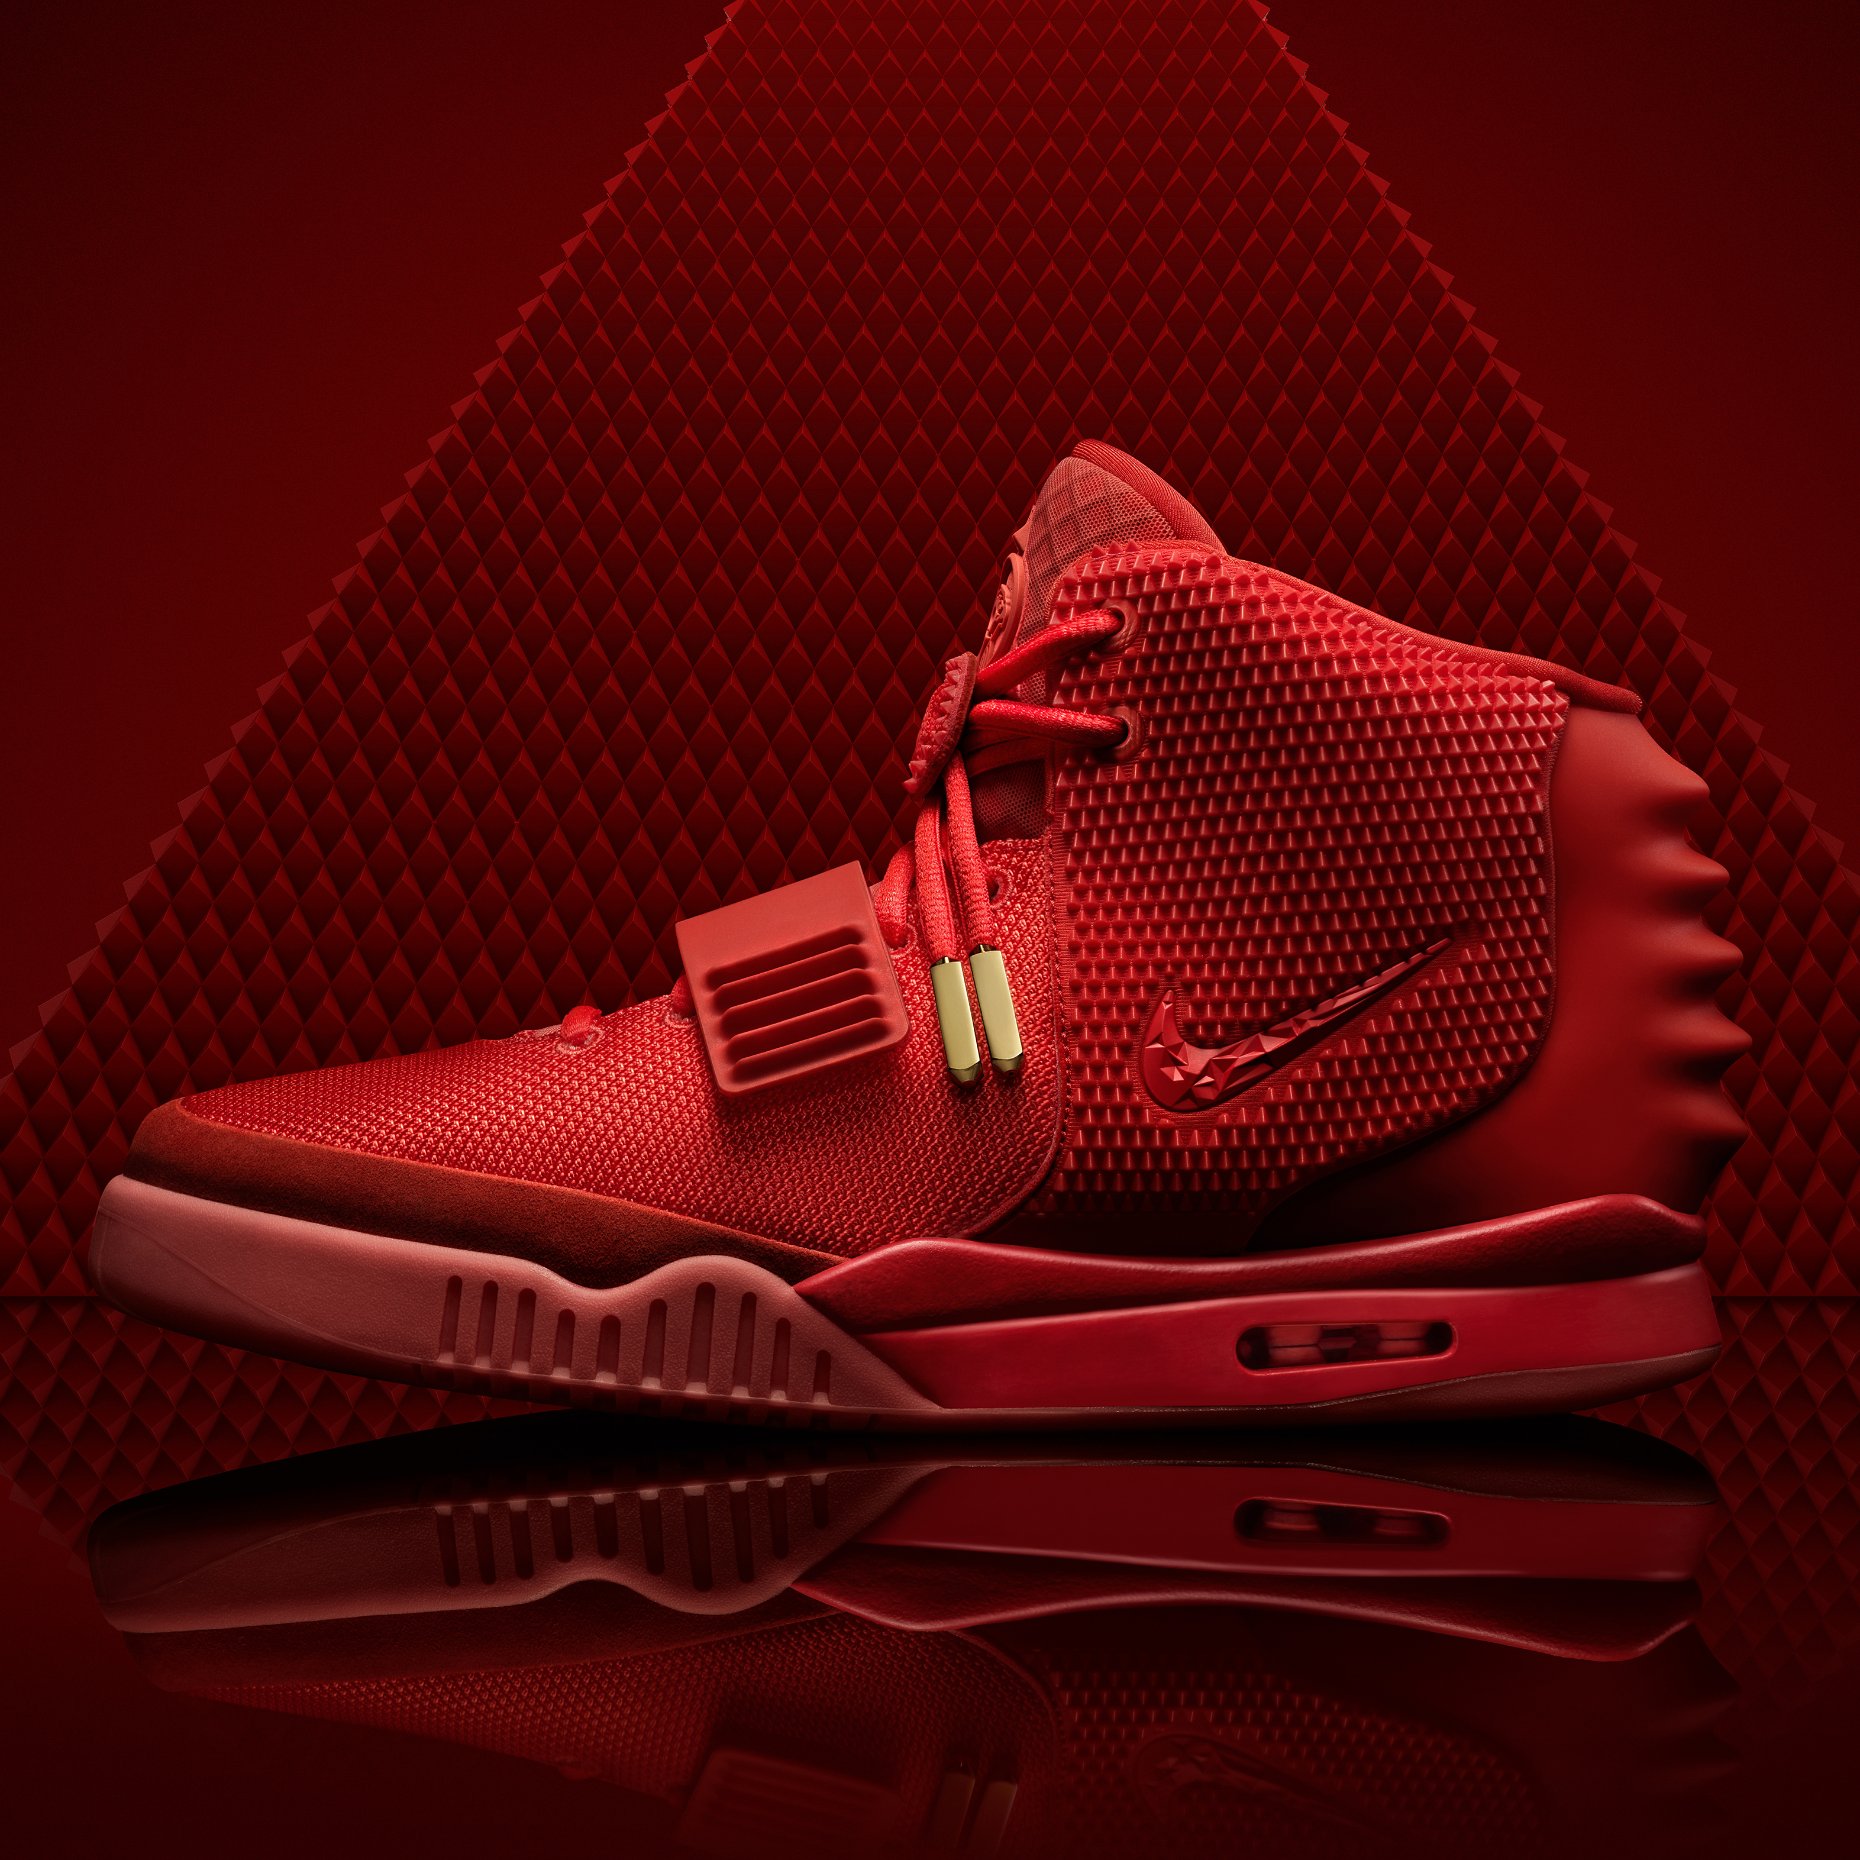 Nike Air Yeezy II Valentines Day SOLD OUT   Inside The Sneakerbox